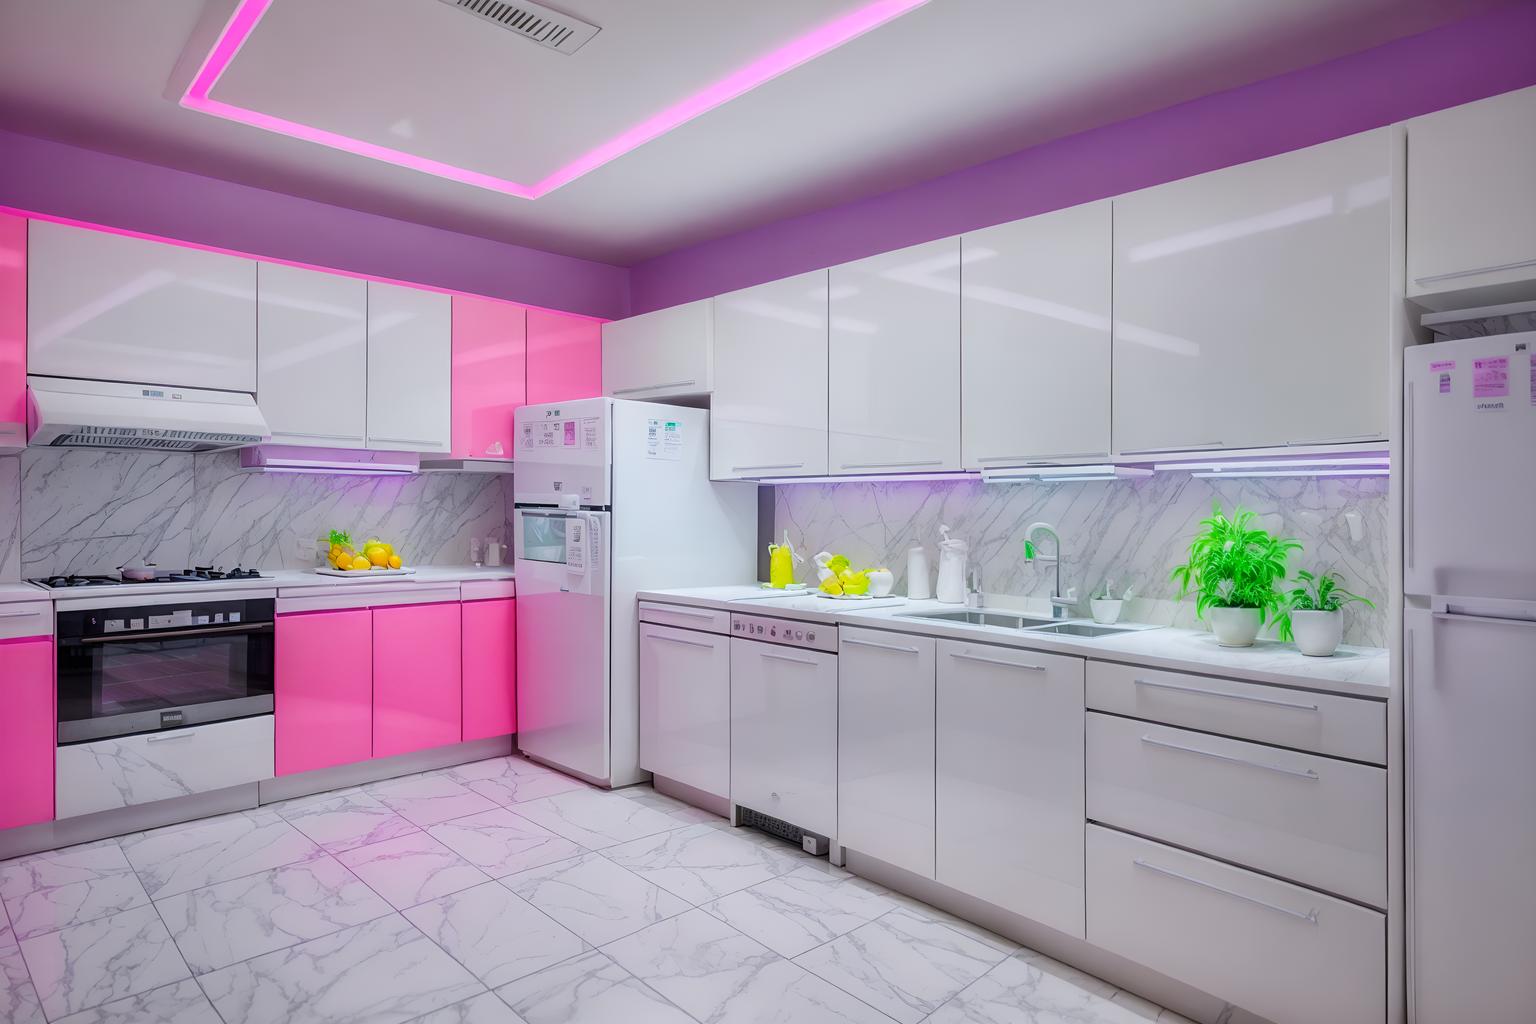 vaporwave-style (kitchen interior) with kitchen cabinets and plant and sink and refrigerator and stove and worktops and kitchen cabinets. . with neon glow and purple lights and bright pink and neon glow and white roman statues, white roman sculptures, white roman columns, white roman pillars in the center of the room, and washed out colors and white square bathroom tiles and palm trees. . cinematic photo, highly detailed, cinematic lighting, ultra-detailed, ultrarealistic, photorealism, 8k. vaporwave interior design style. masterpiece, cinematic light, ultrarealistic+, photorealistic+, 8k, raw photo, realistic, sharp focus on eyes, (symmetrical eyes), (intact eyes), hyperrealistic, highest quality, best quality, , highly detailed, masterpiece, best quality, extremely detailed 8k wallpaper, masterpiece, best quality, ultra-detailed, best shadow, detailed background, detailed face, detailed eyes, high contrast, best illumination, detailed face, dulux, caustic, dynamic angle, detailed glow. dramatic lighting. highly detailed, insanely detailed hair, symmetrical, intricate details, professionally retouched, 8k high definition. strong bokeh. award winning photo.